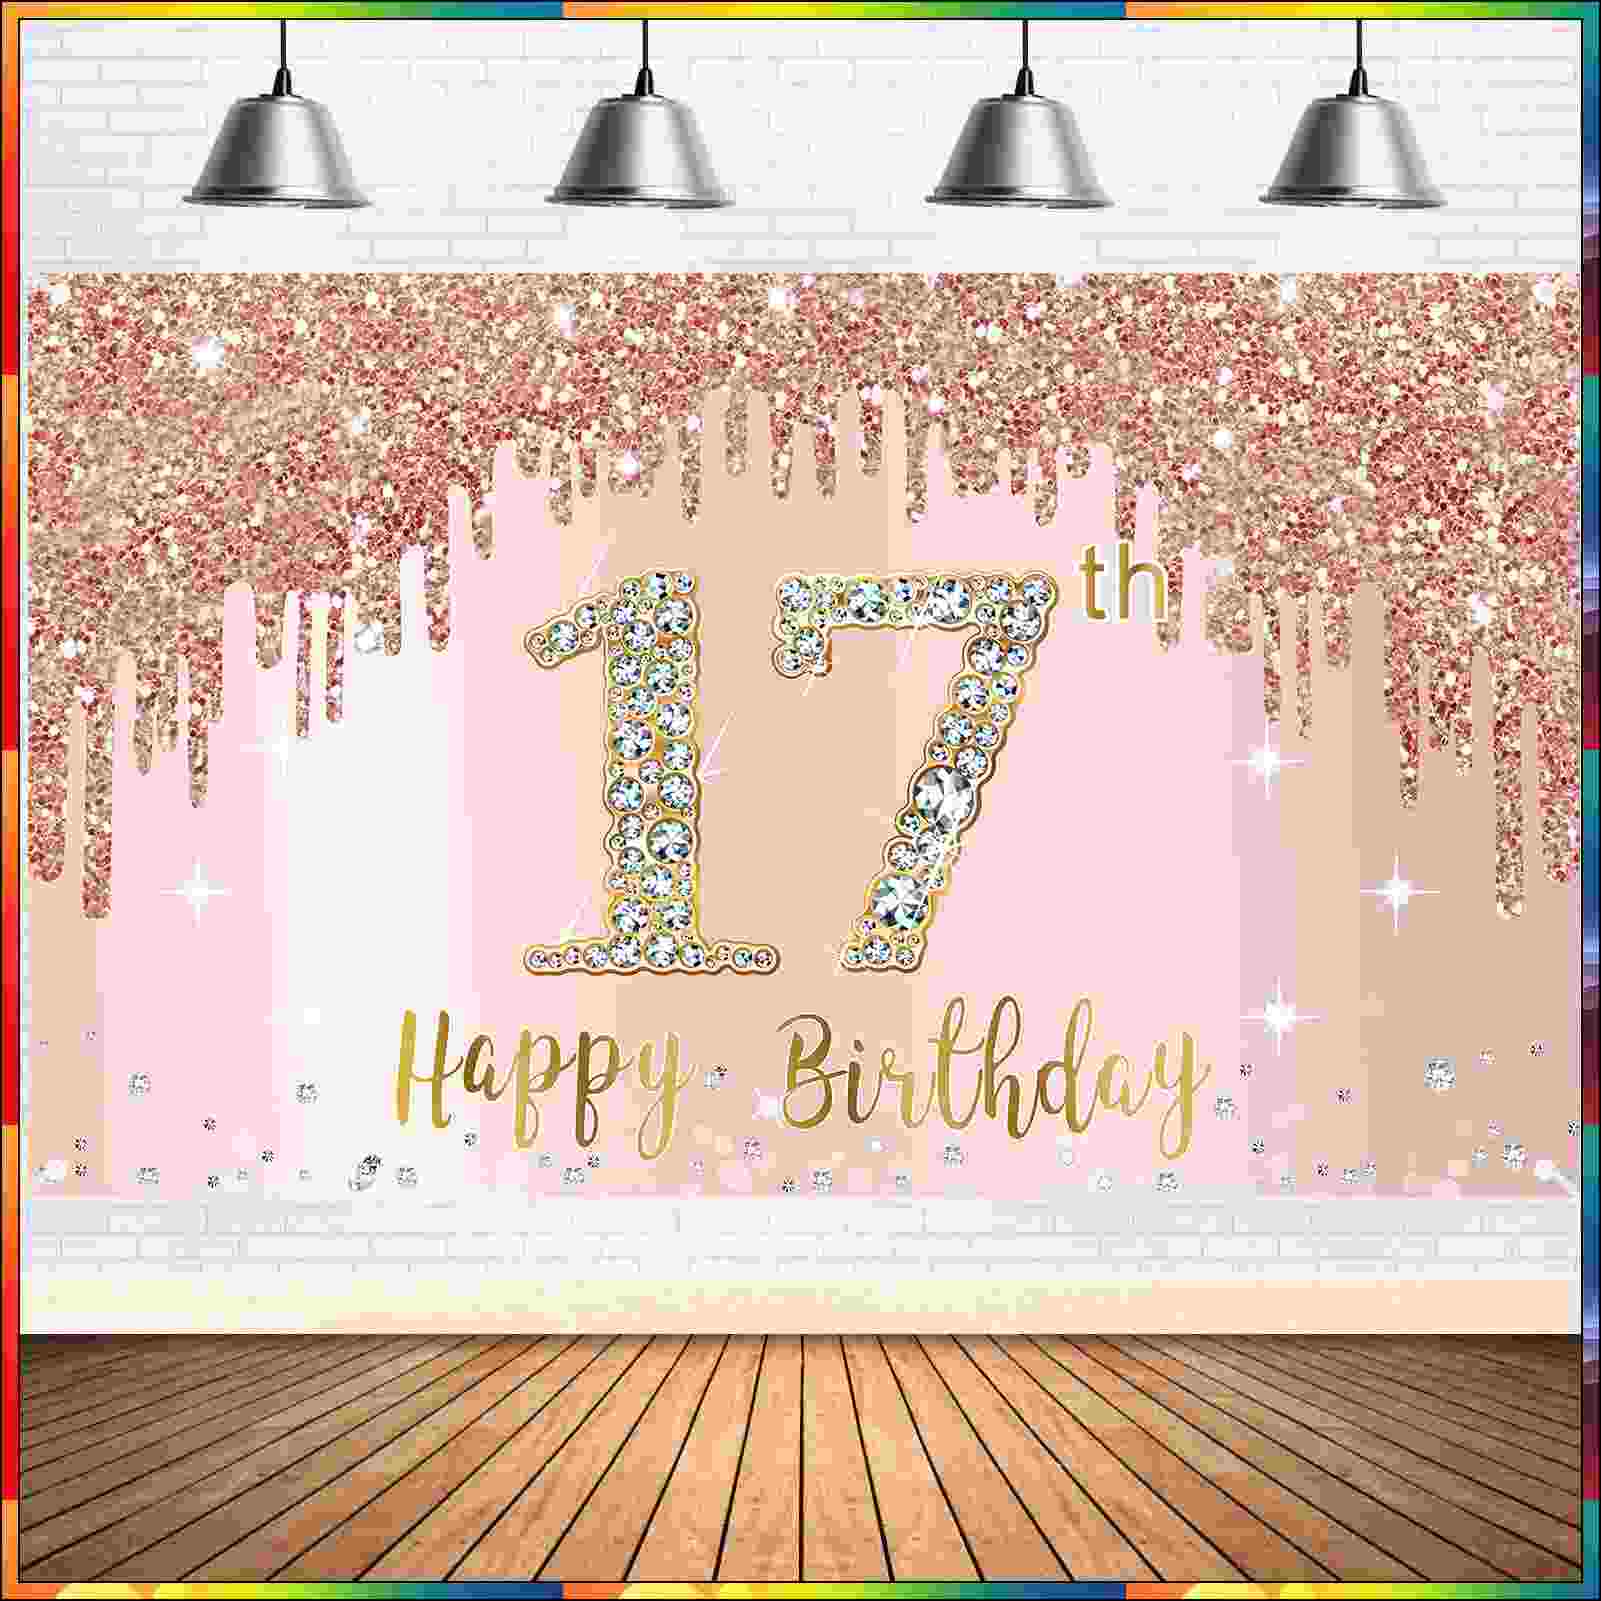 17th birthday girl images
